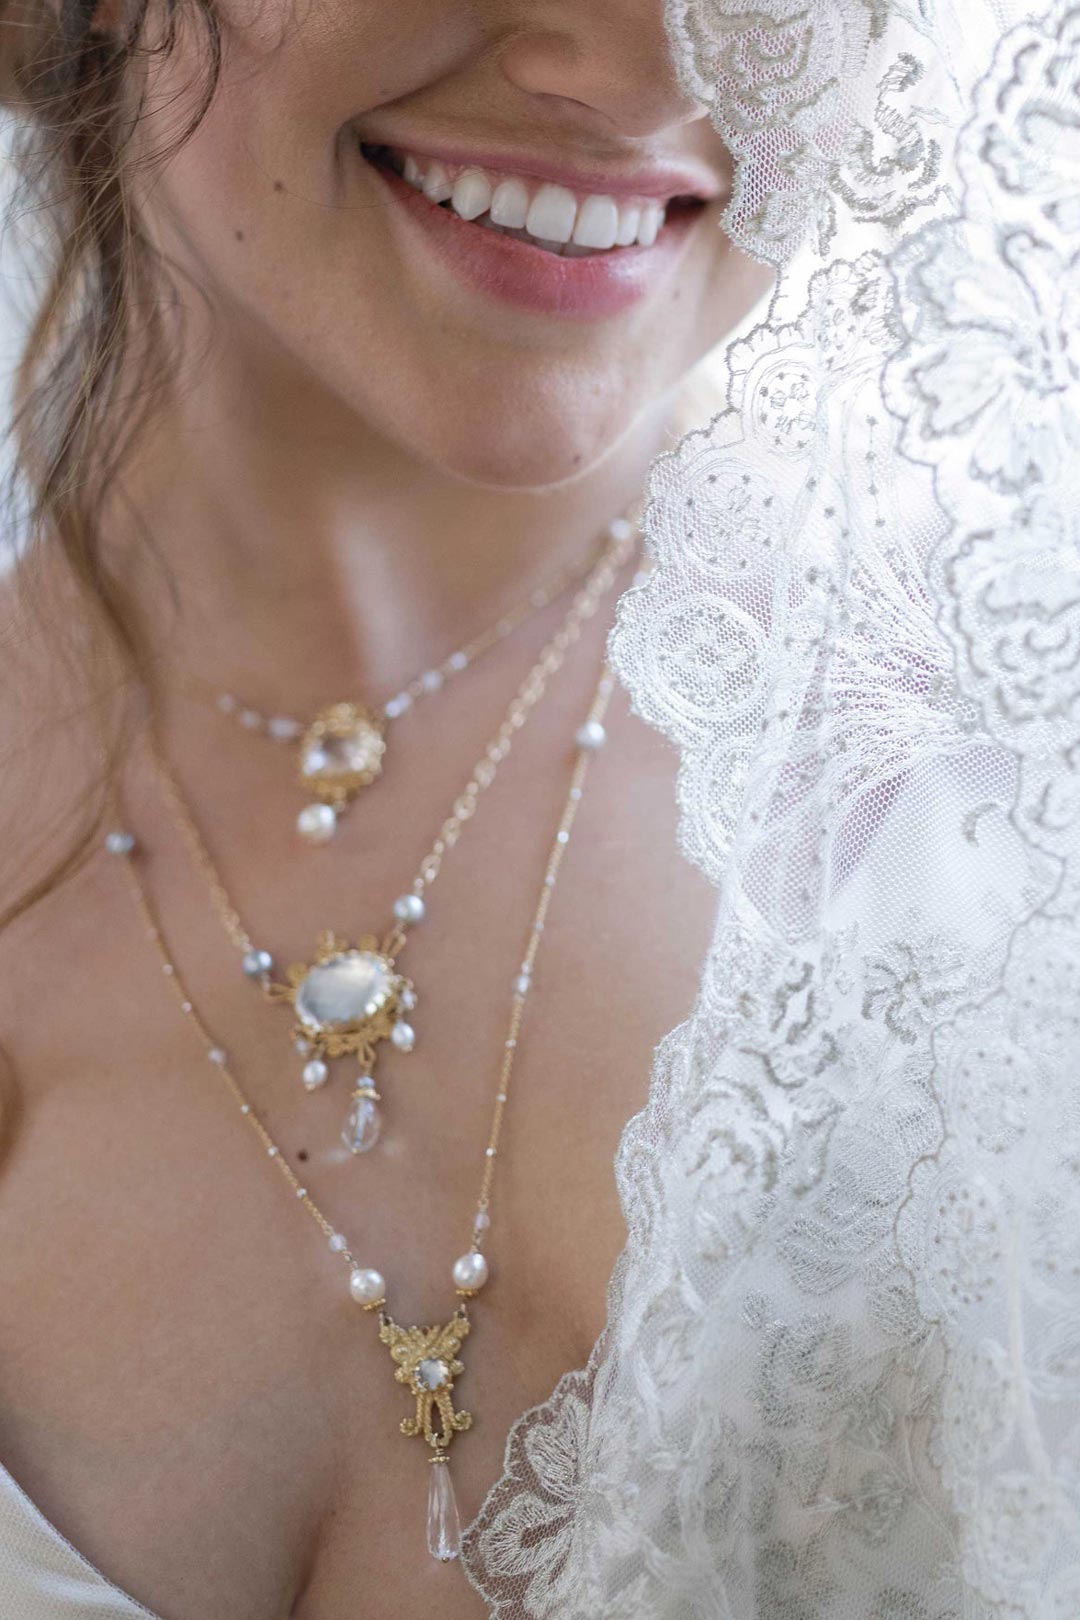 Adorned Neckless by Vanessa Mellet for Claire Pettibone on Model